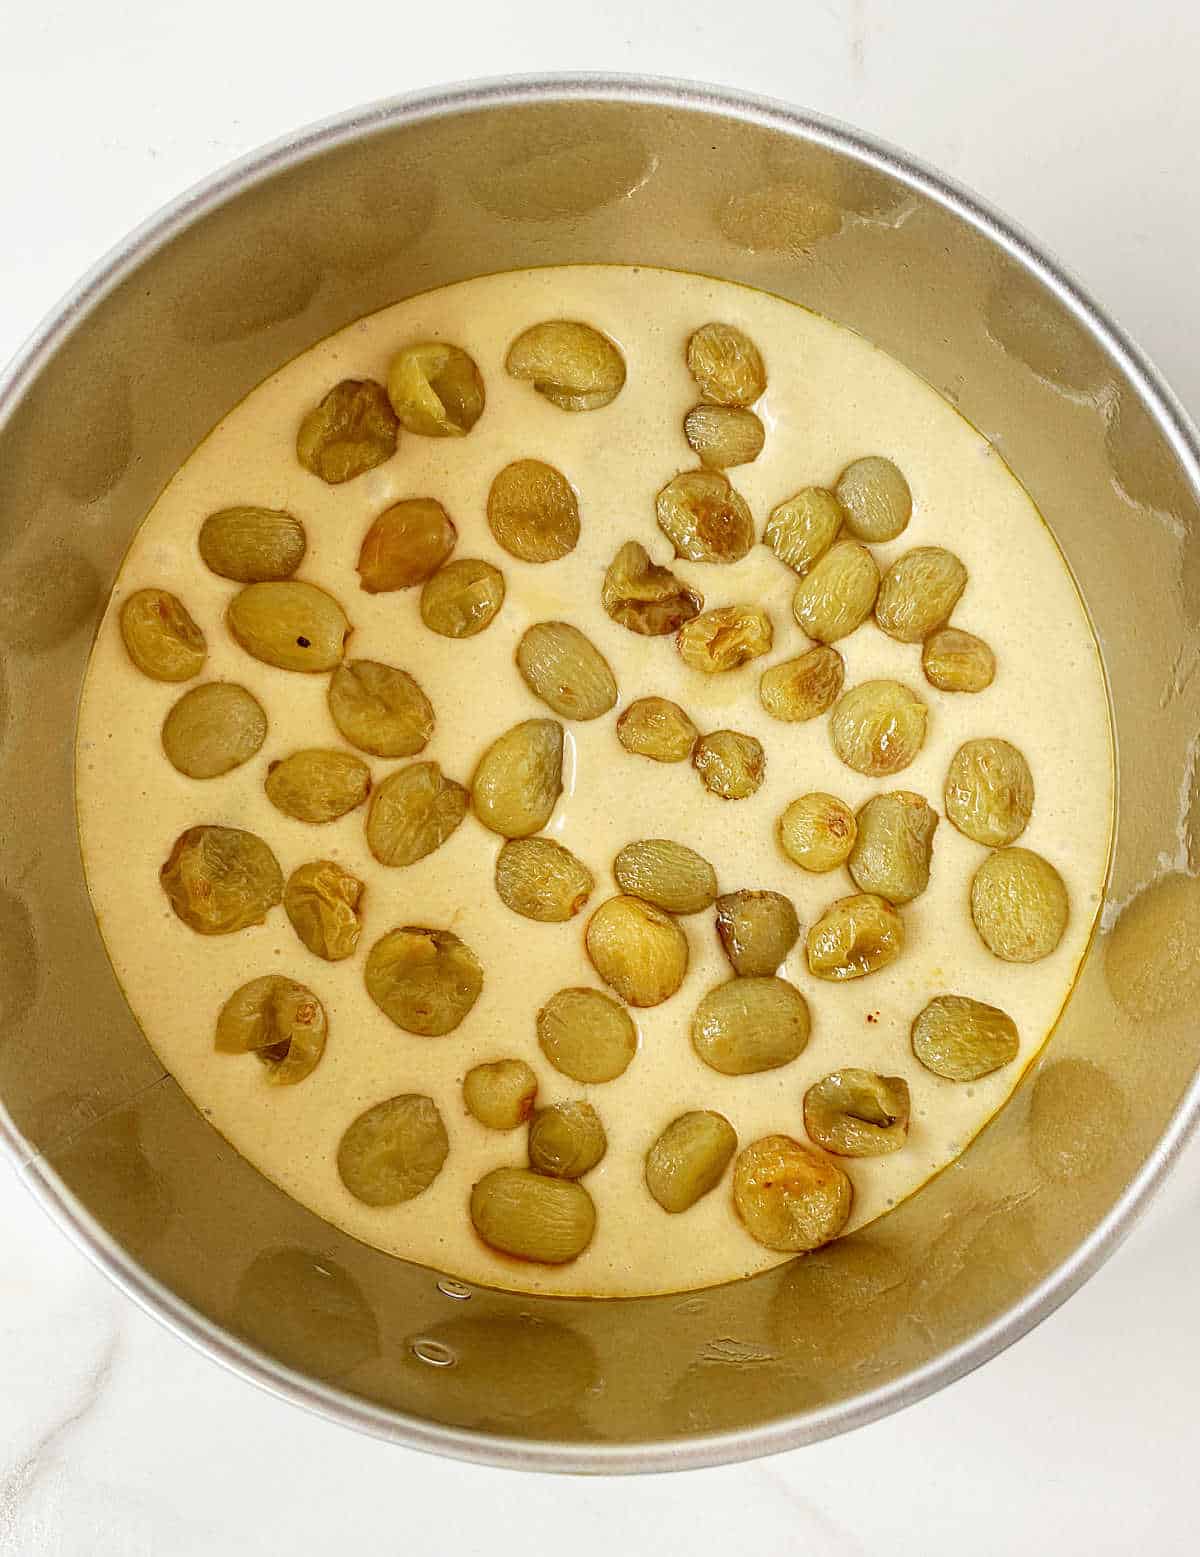 Top view of round cake pan with batter and grapes